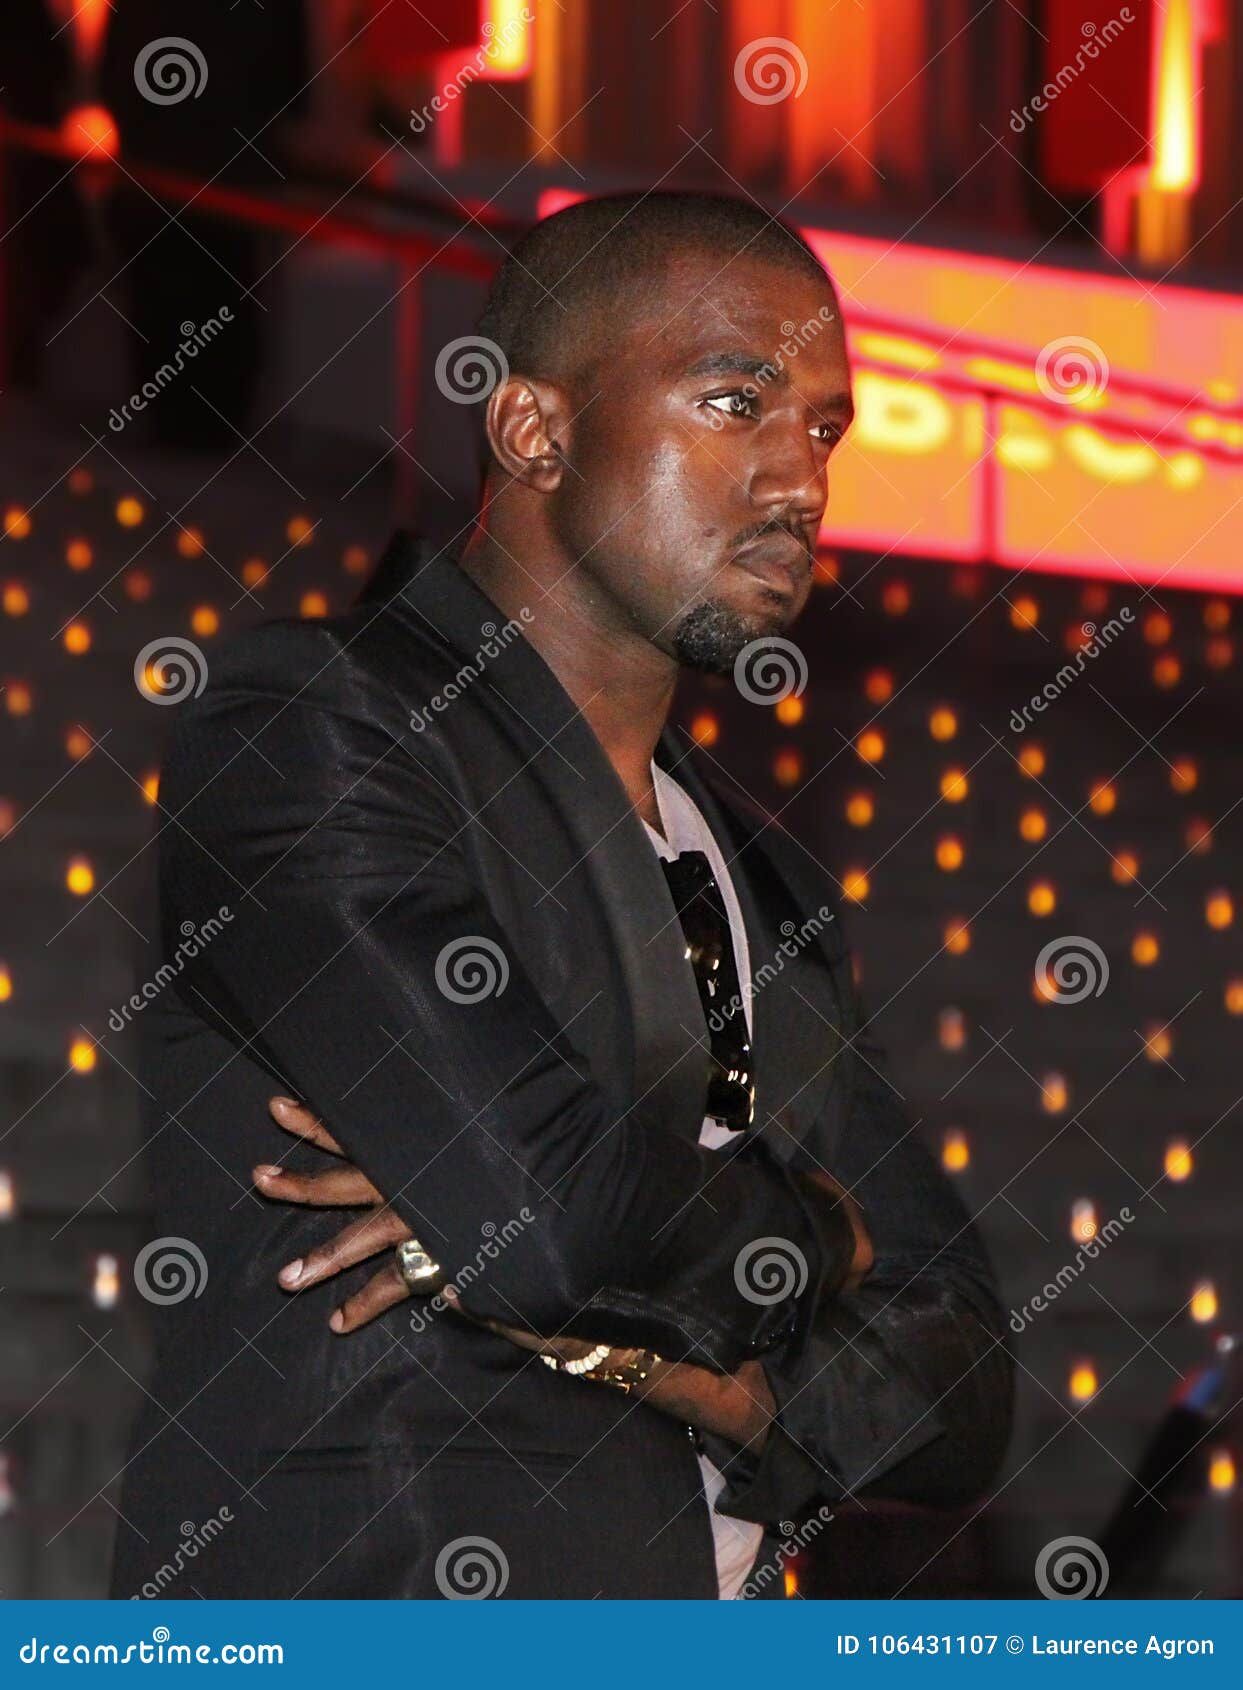 Kanye Ye West At Vanity Fair Party For 2009 Tribeca Film Festival In